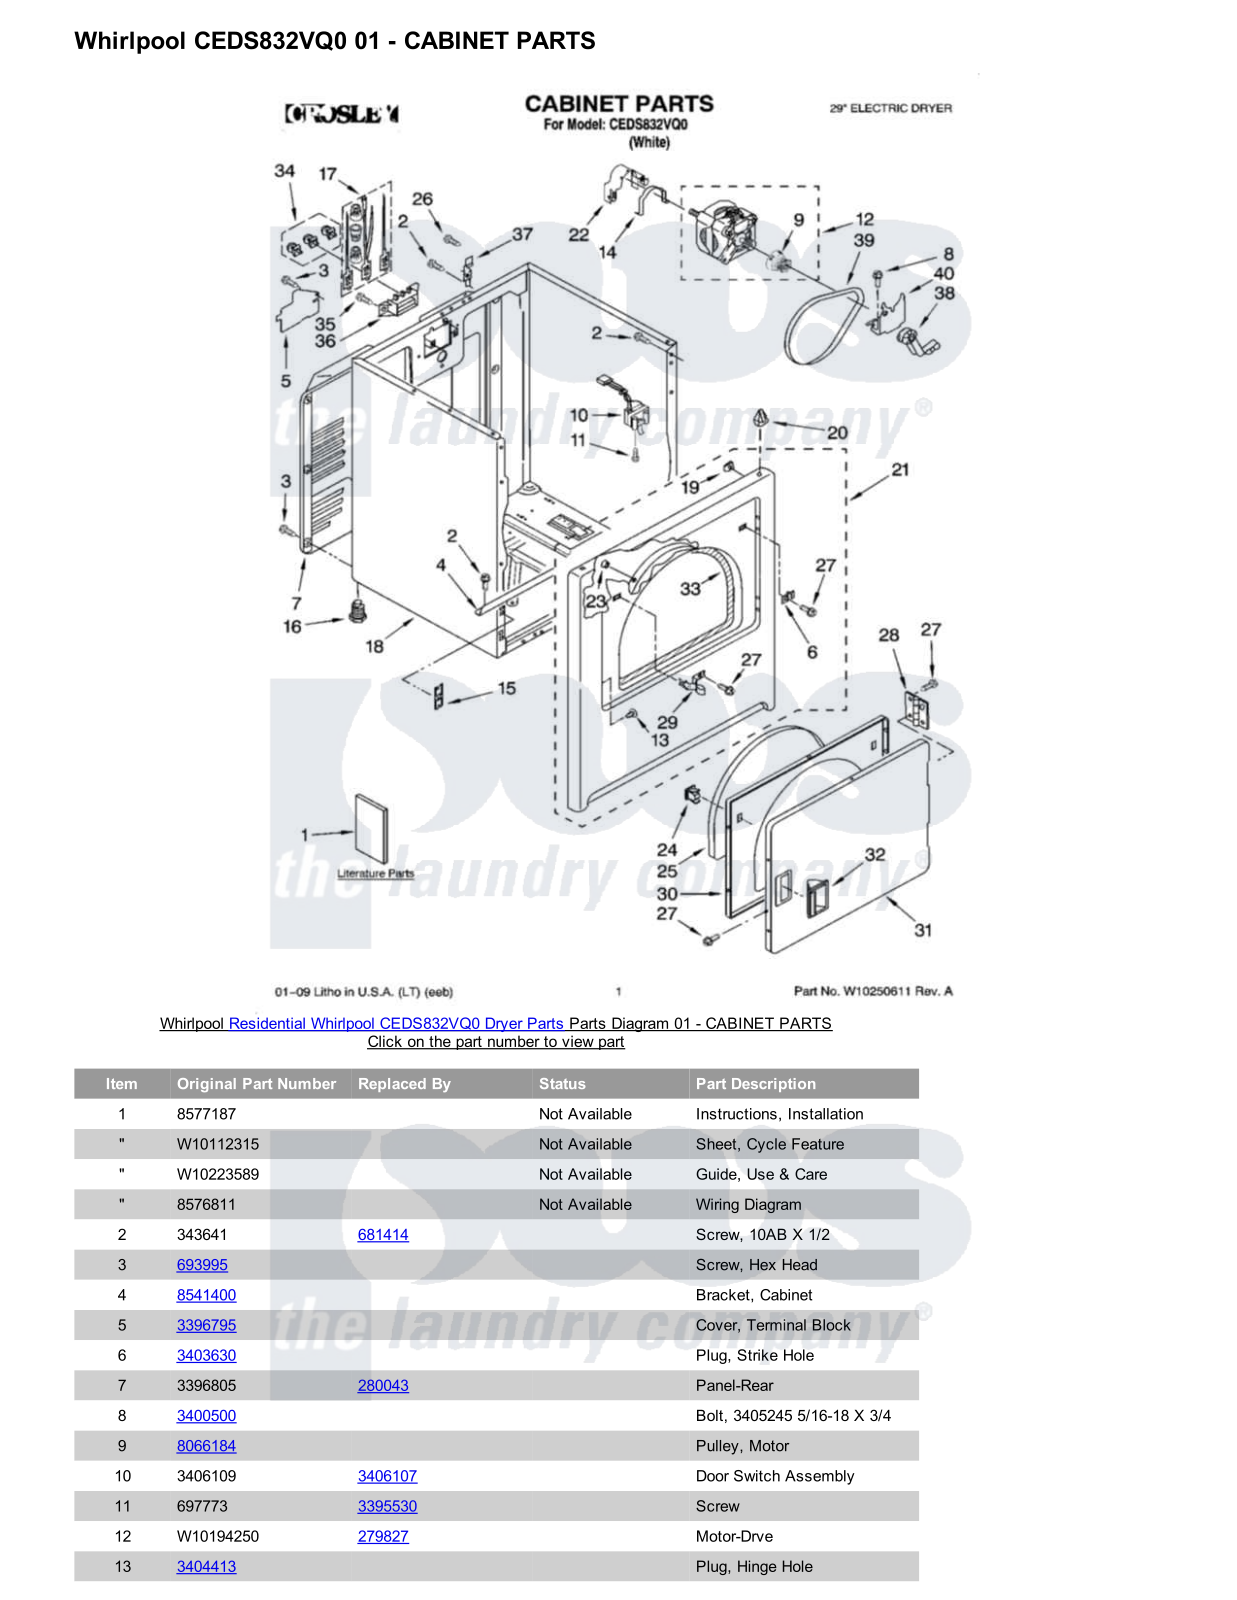 Whirlpool CEDS832VQ0 Parts Diagram